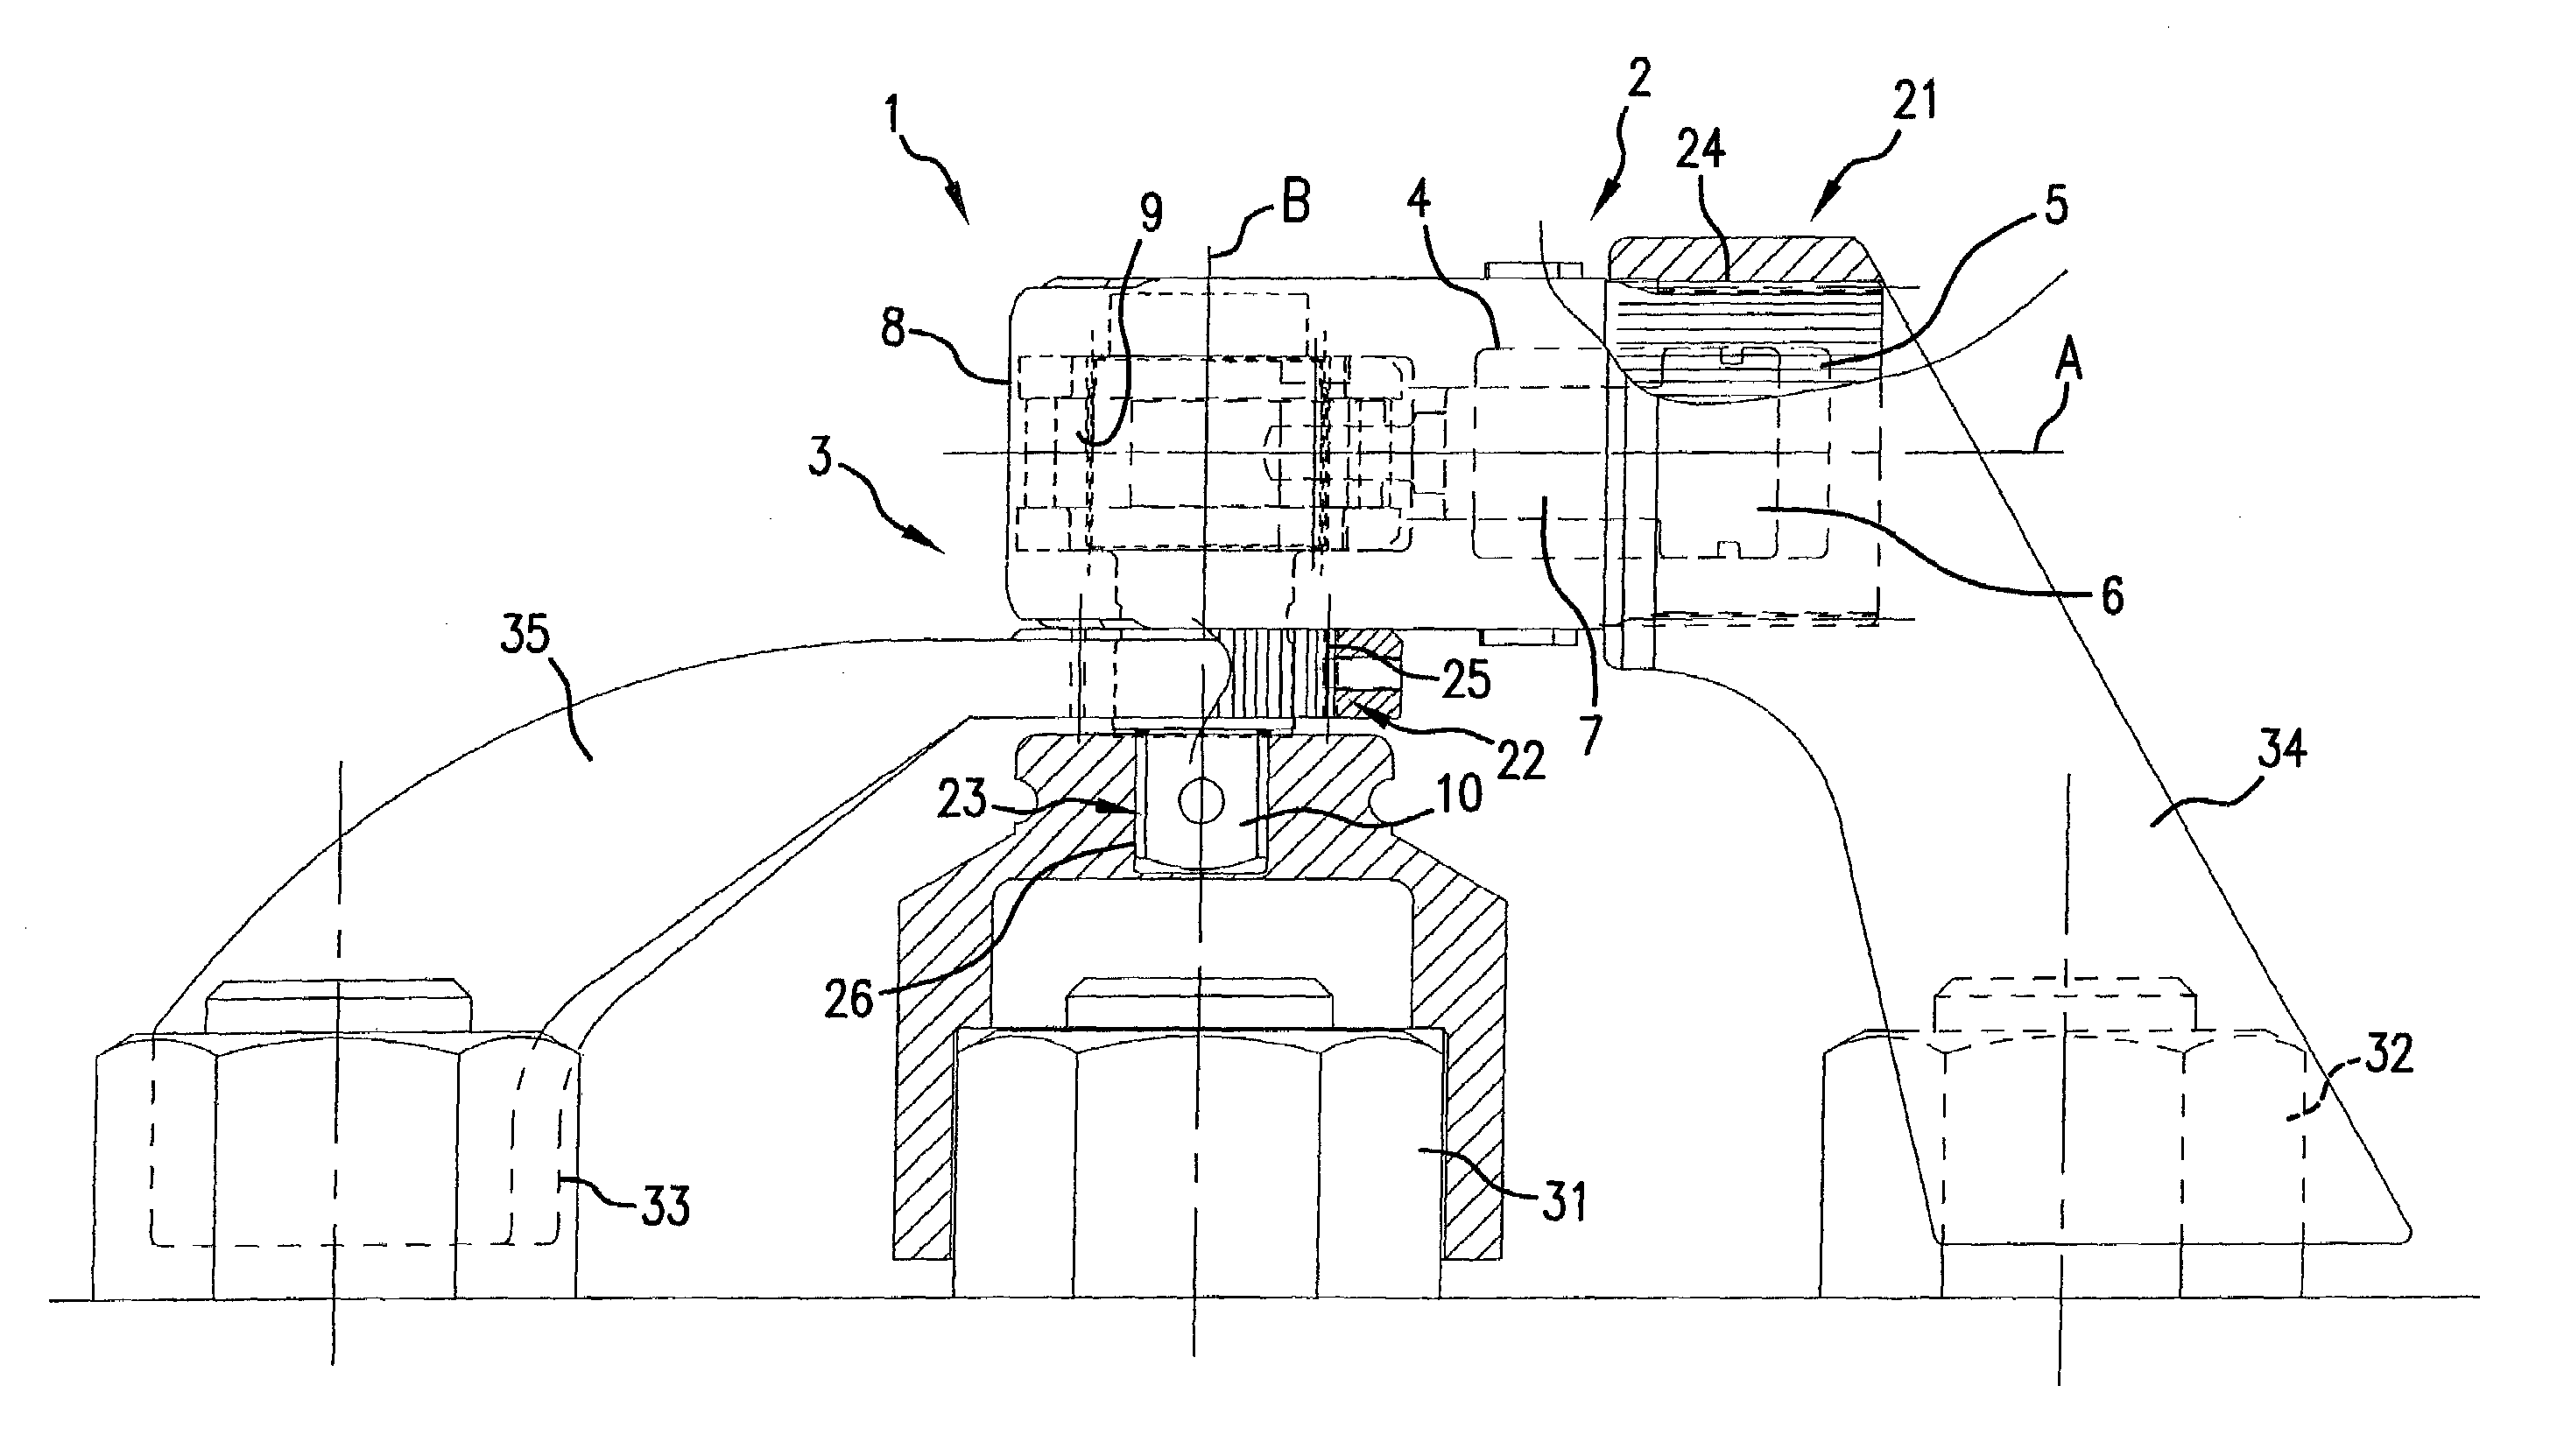 Fluid-operated torque wrench for and method of tightening or loosening fasteners